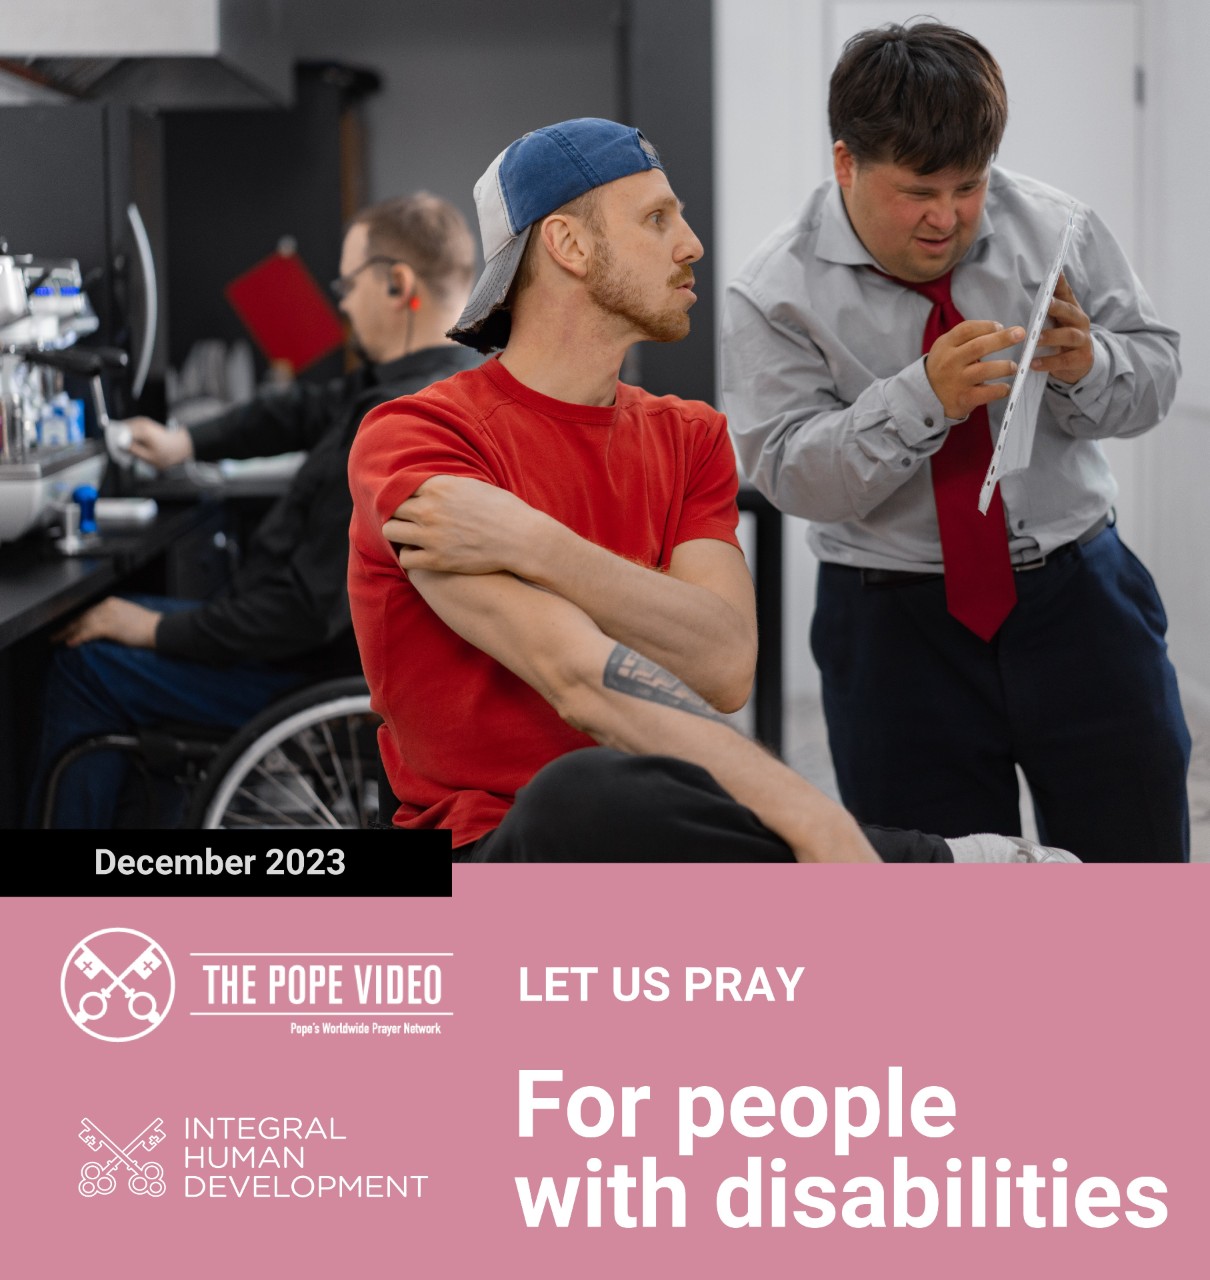 Pope Francis asks to pray for people with disabilities